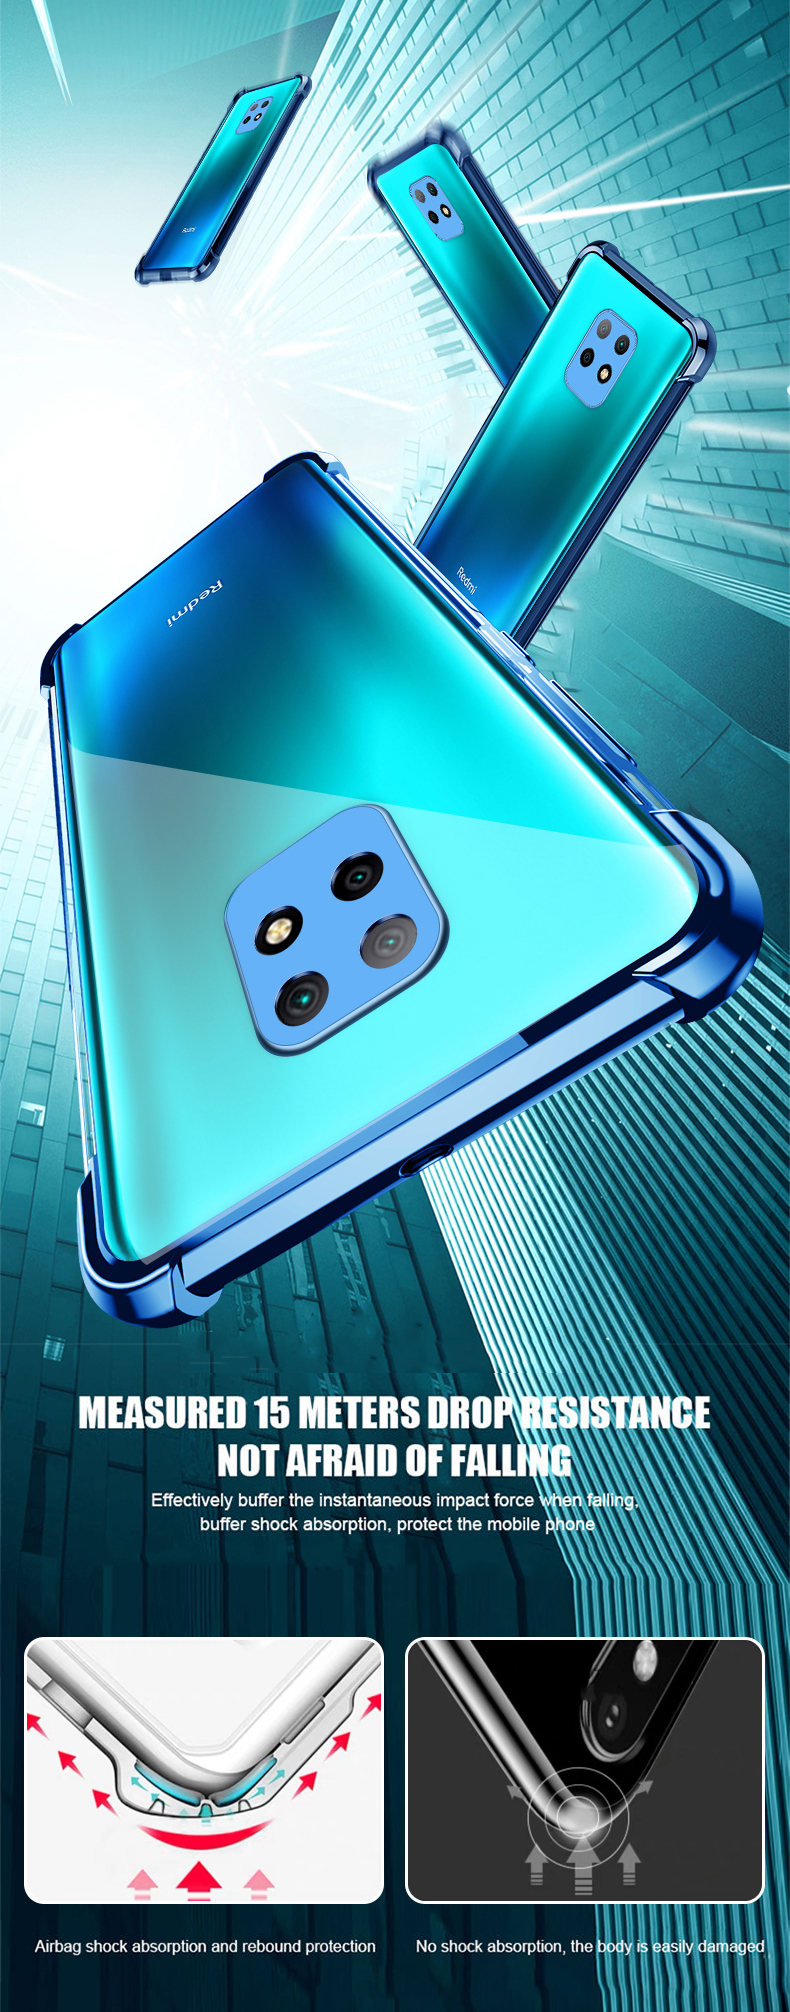 Bakeey for Xiaomi Redmi Note 9S / Redmi Note 9 Pro Case 2 in 1 Plating with Airbag Lens Protector Ultra-Thin Anti-Fingerprint Shockproof Transparent Soft TPU Protective Case Non-original